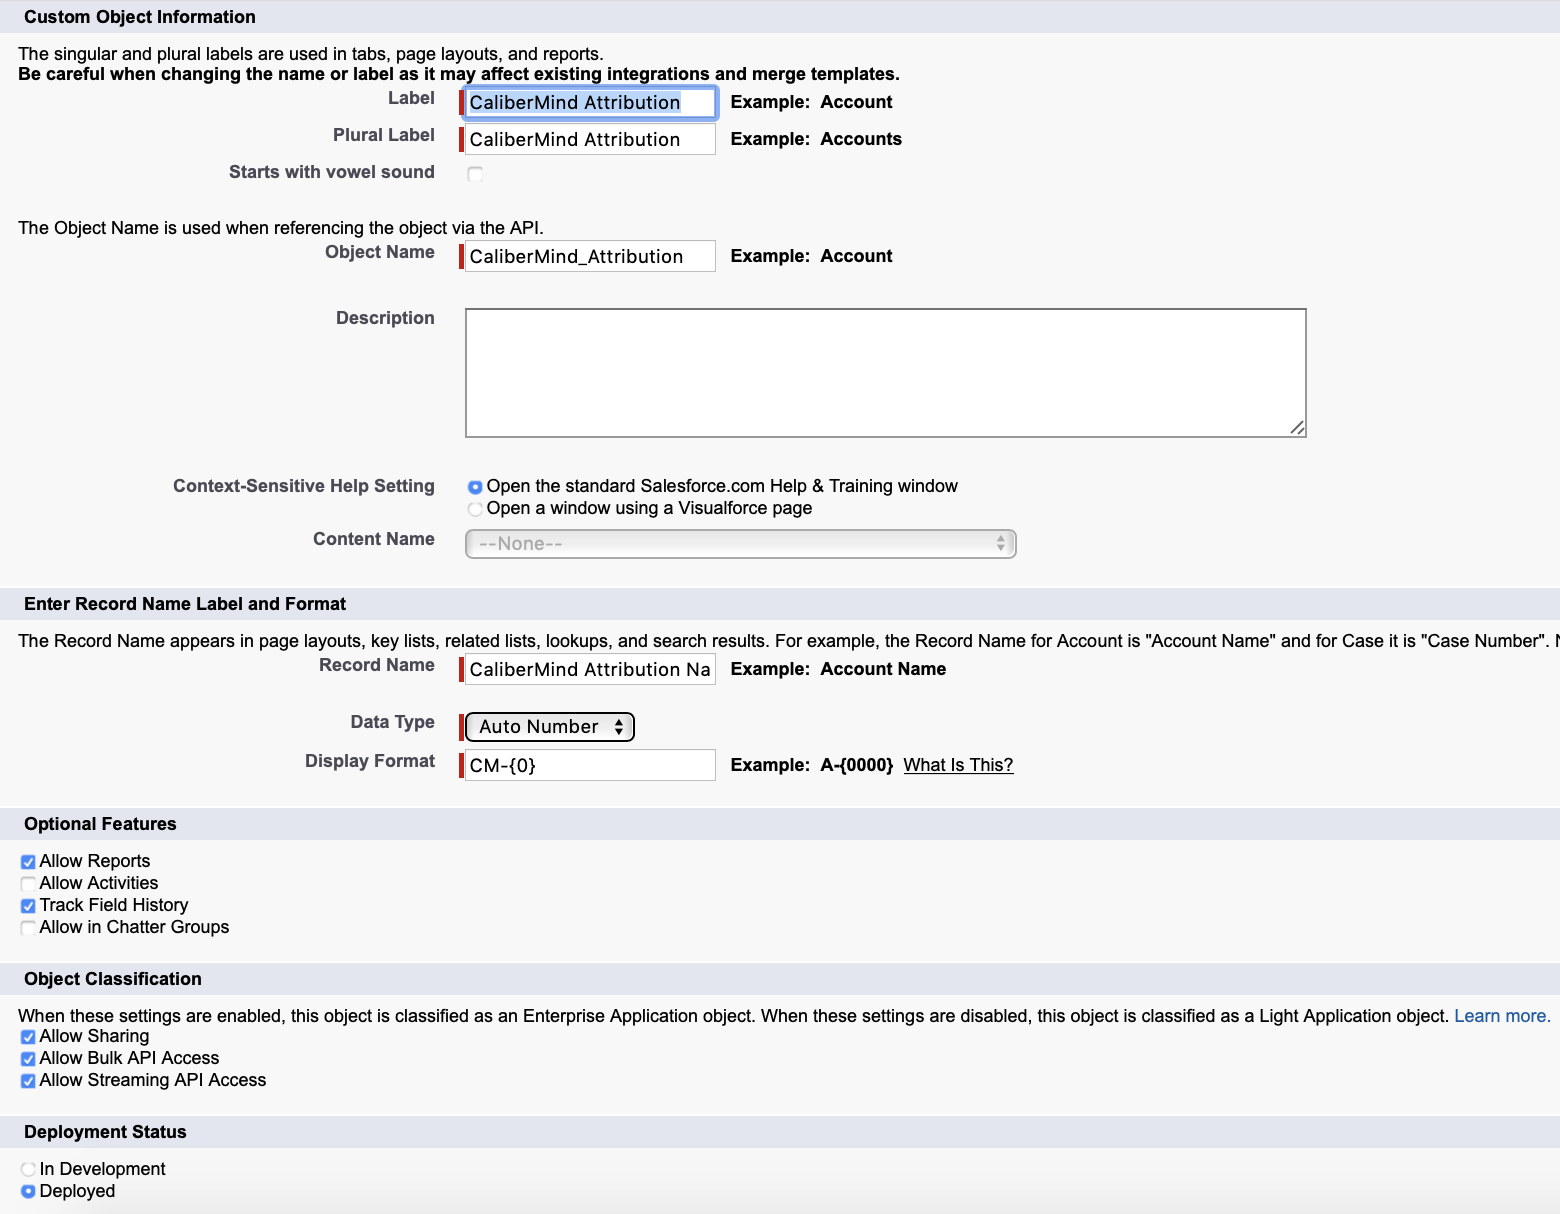 Creating a new custom object in Salesforce for syncing with CaliberMind